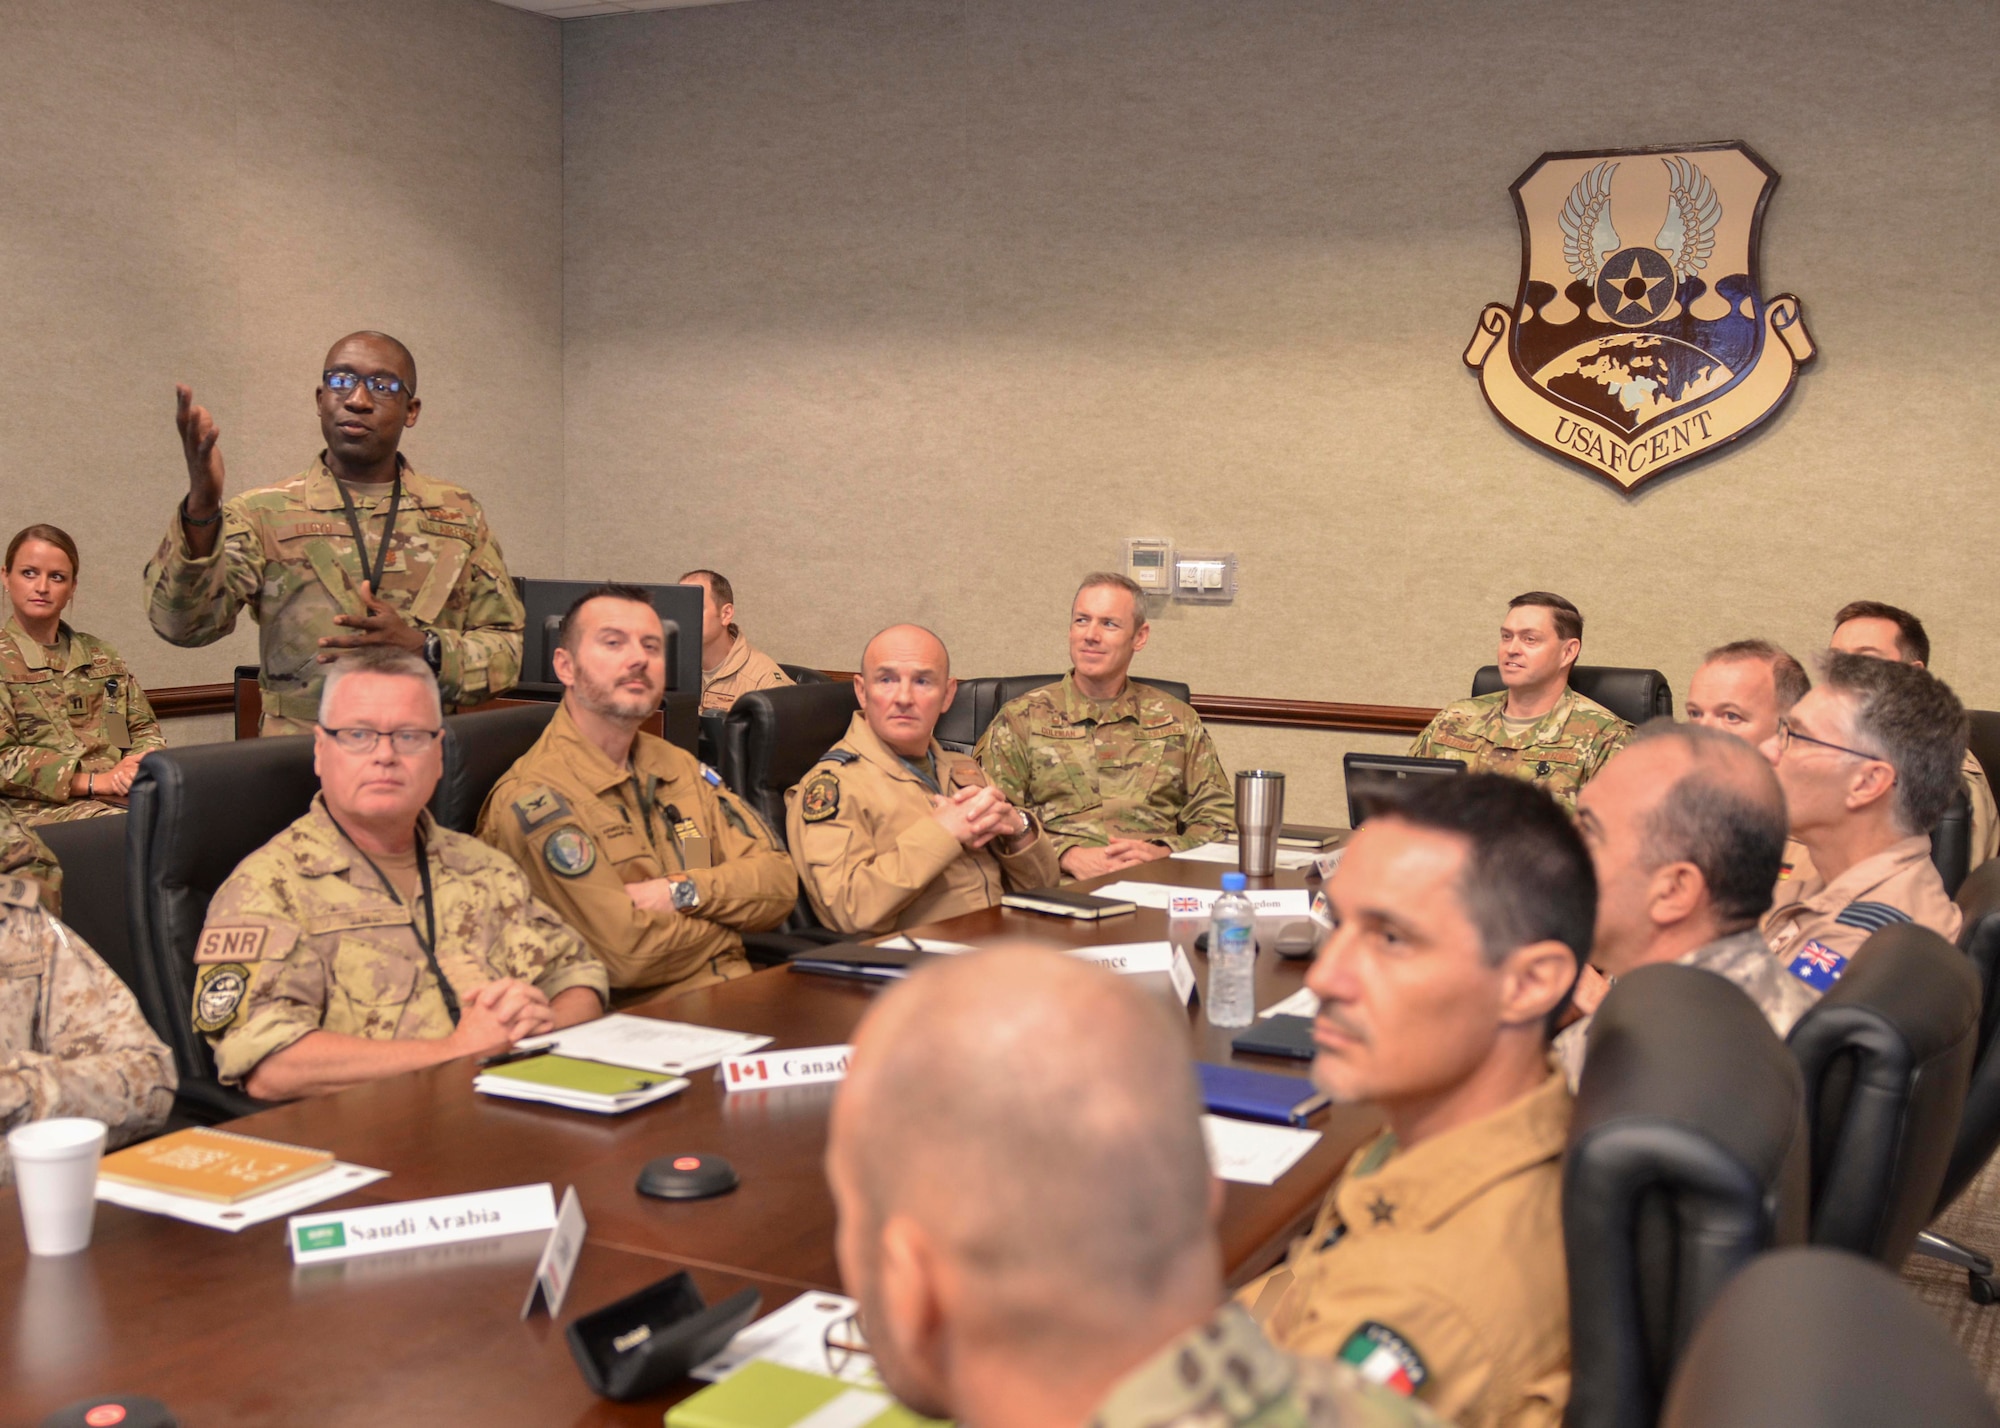 U.S. Air Force Maj. Gen. B. Chance Saltzman, WHERE IS HE AT, U.S. Air Forces Central Command deputy Combined Force Air Component Commander, listens to a briefing in the Combined Air Operations Center during a senior national representatives meeting at Al Udeid Air Base, Qatar, Sept. 5, 2019.